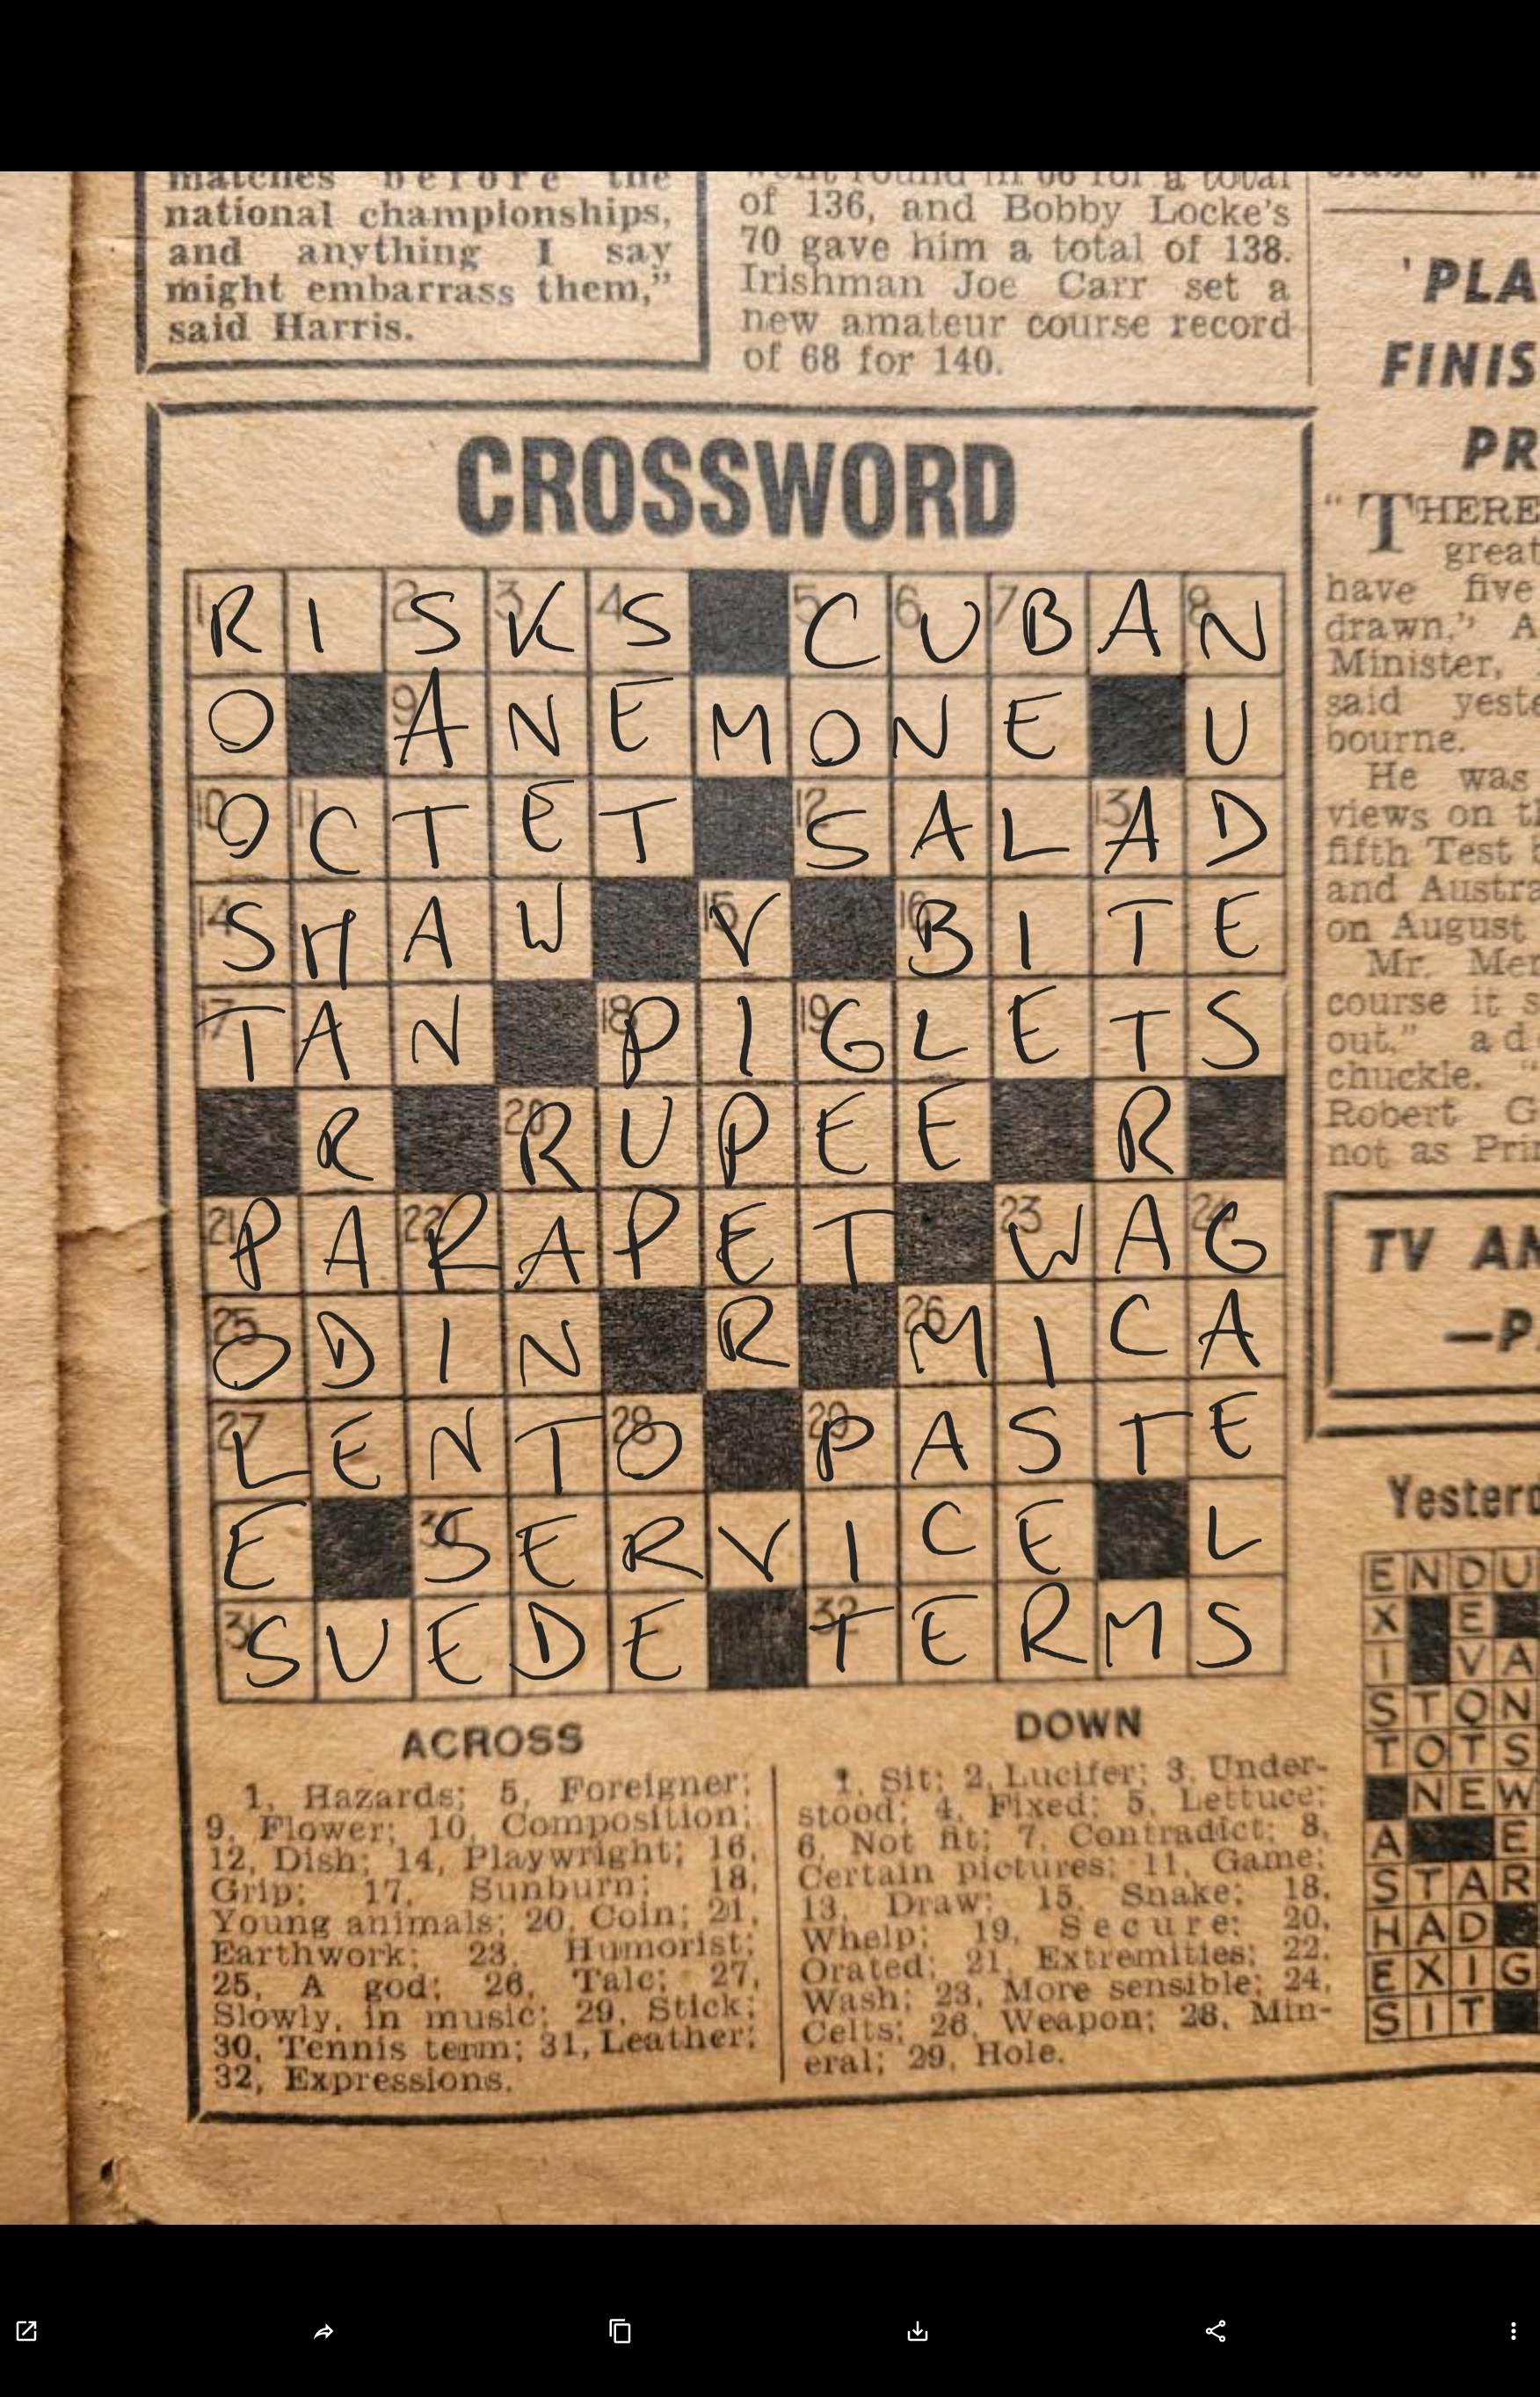 Any crossword fans? Here s the Daily Mirror crossword from July 31